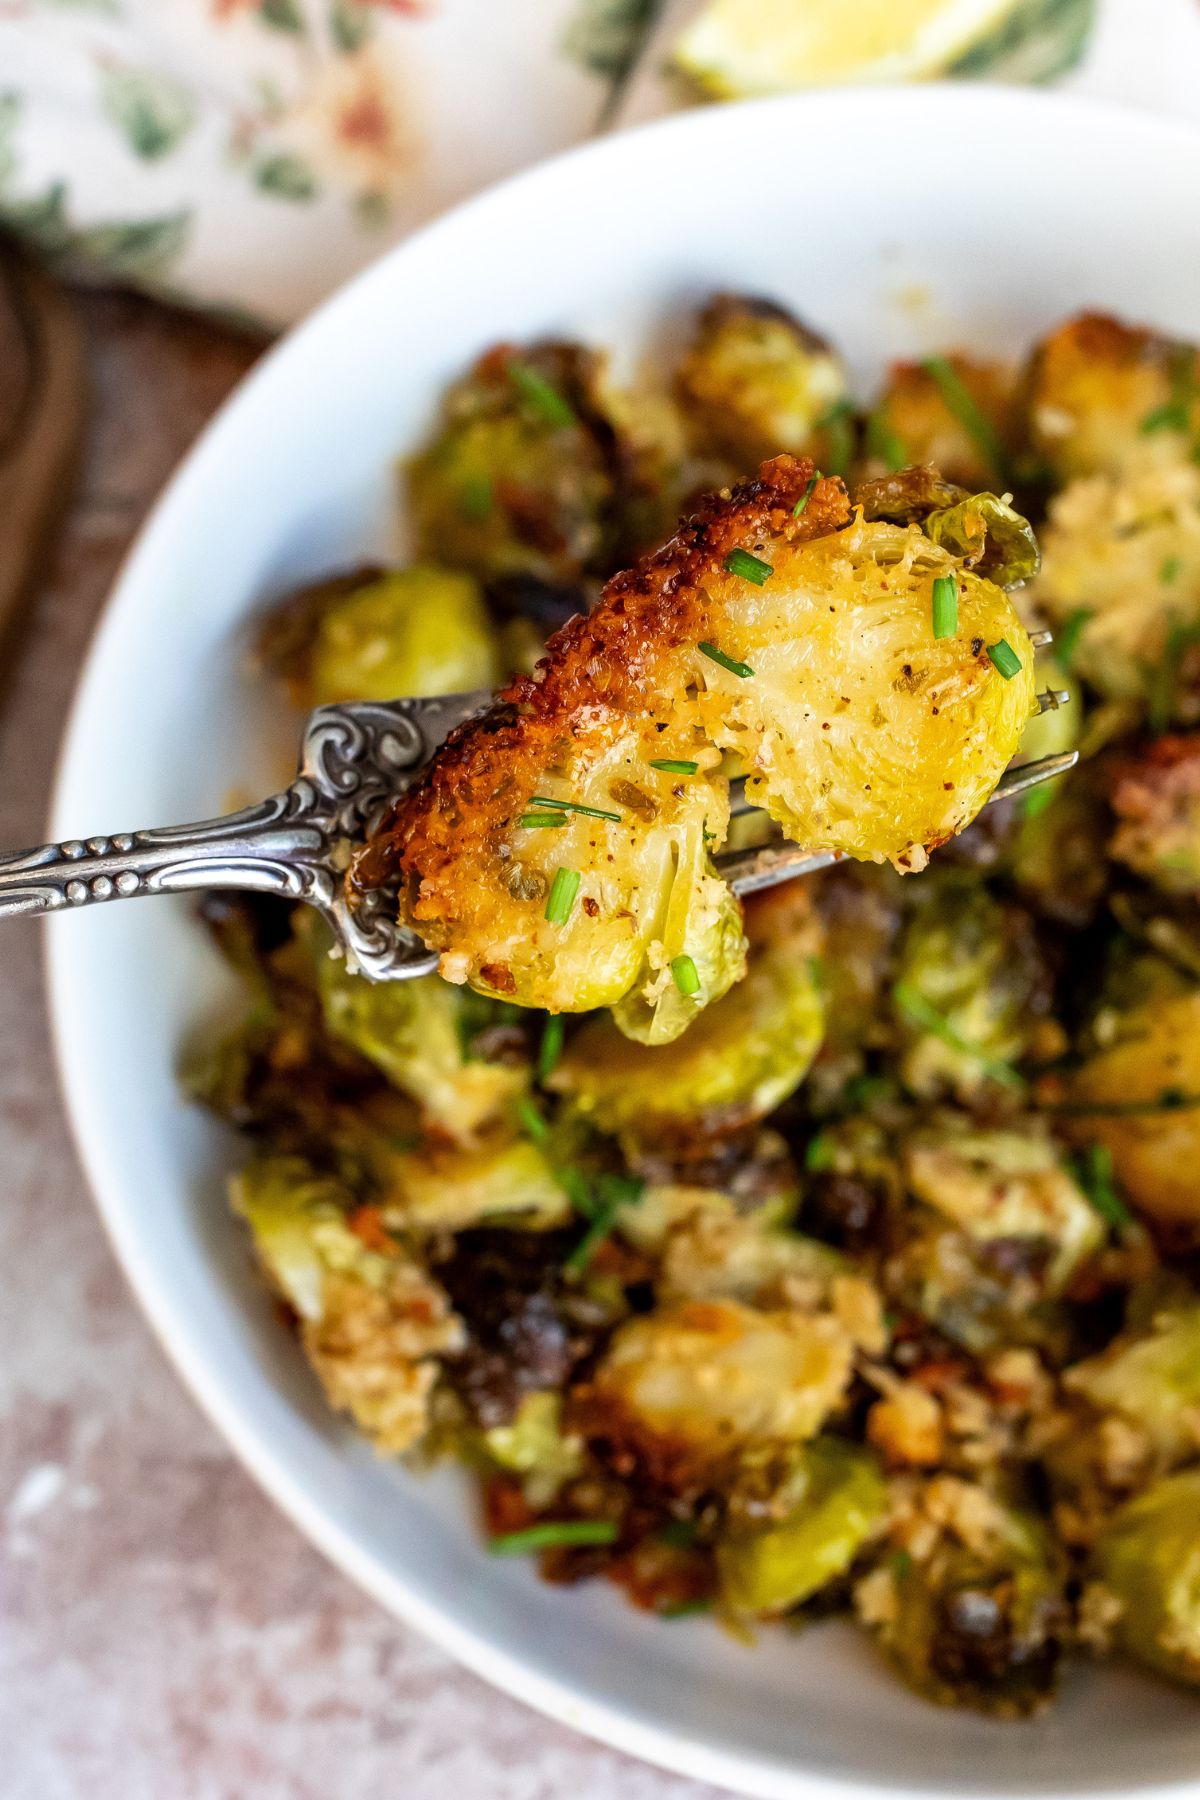 Brussel sprouts crusted in parmesan on a silver fork up close. 